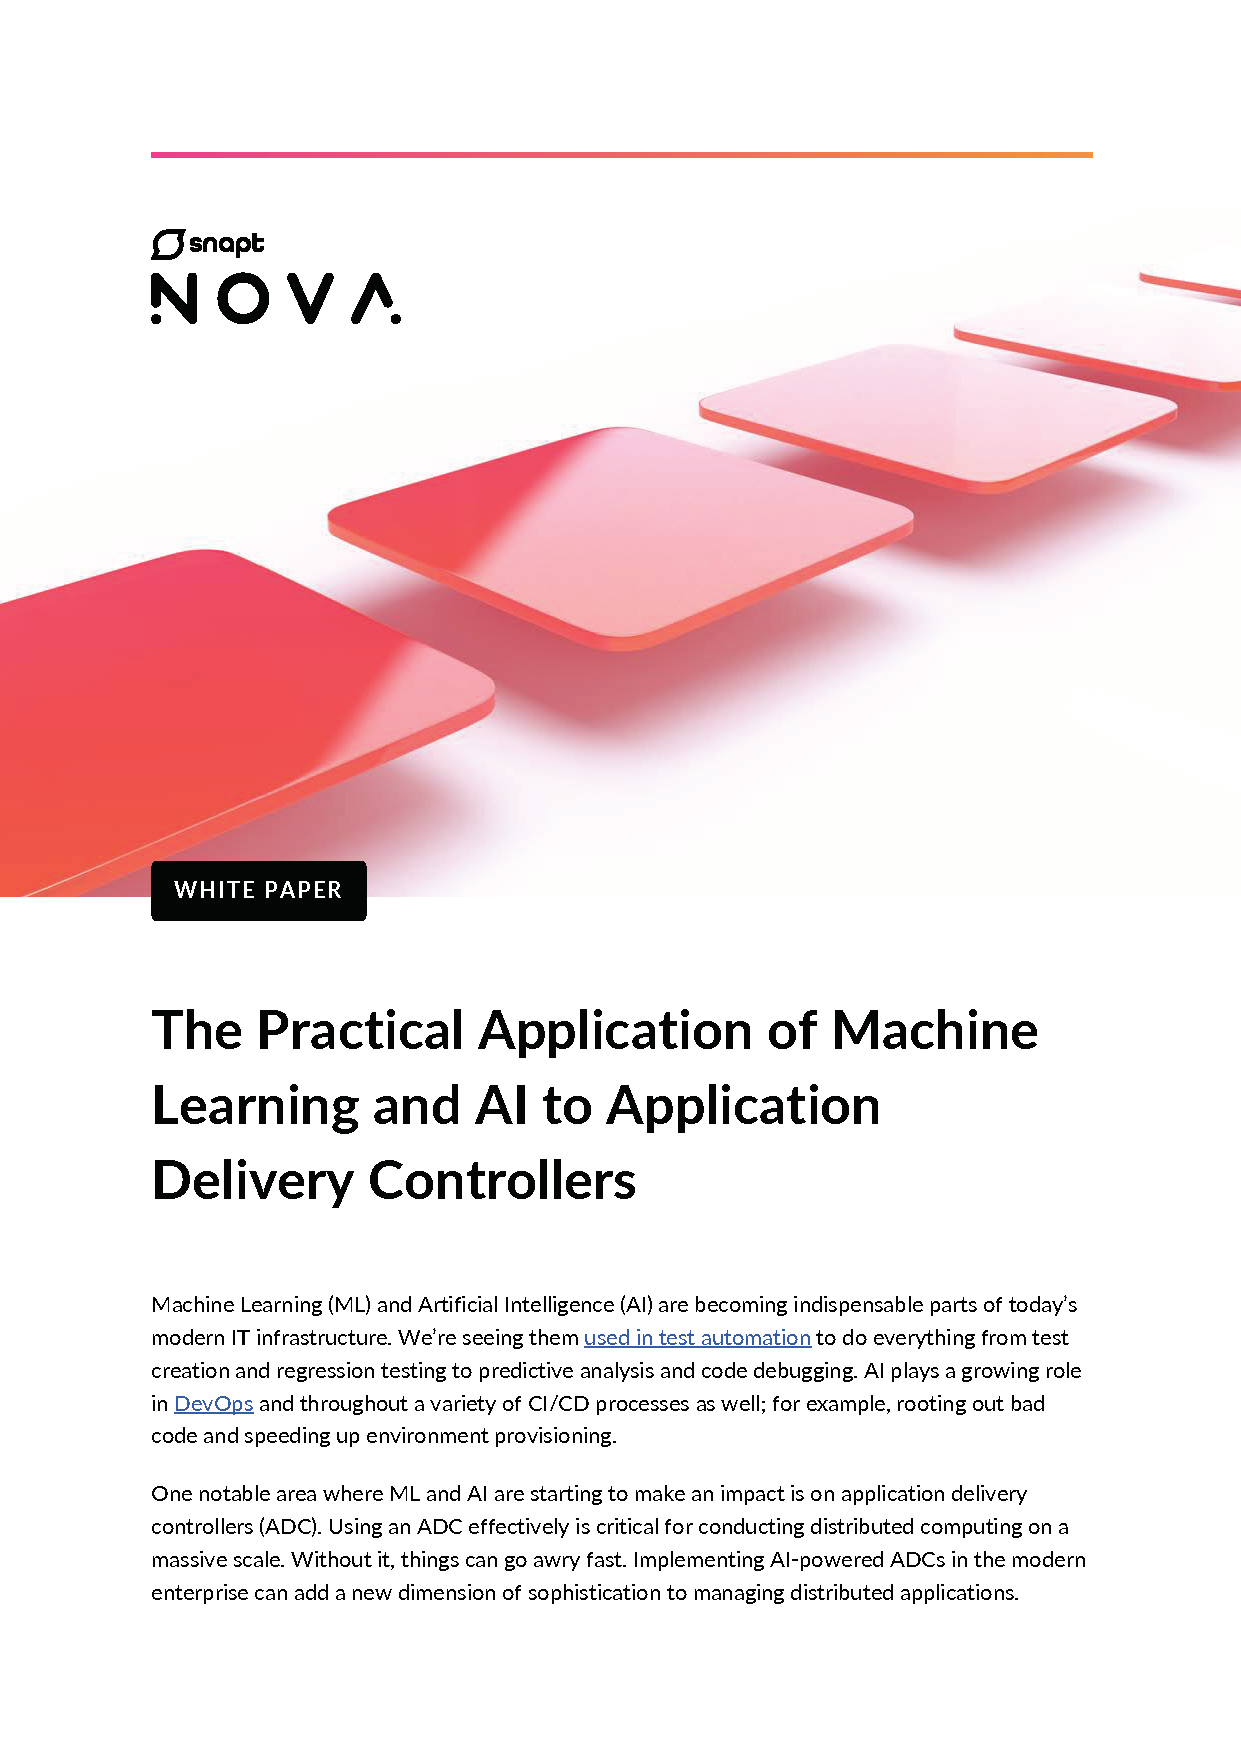 White Paper - The Practical Application of Machine Learning and AI to Application Delivery Controllers_Page_01